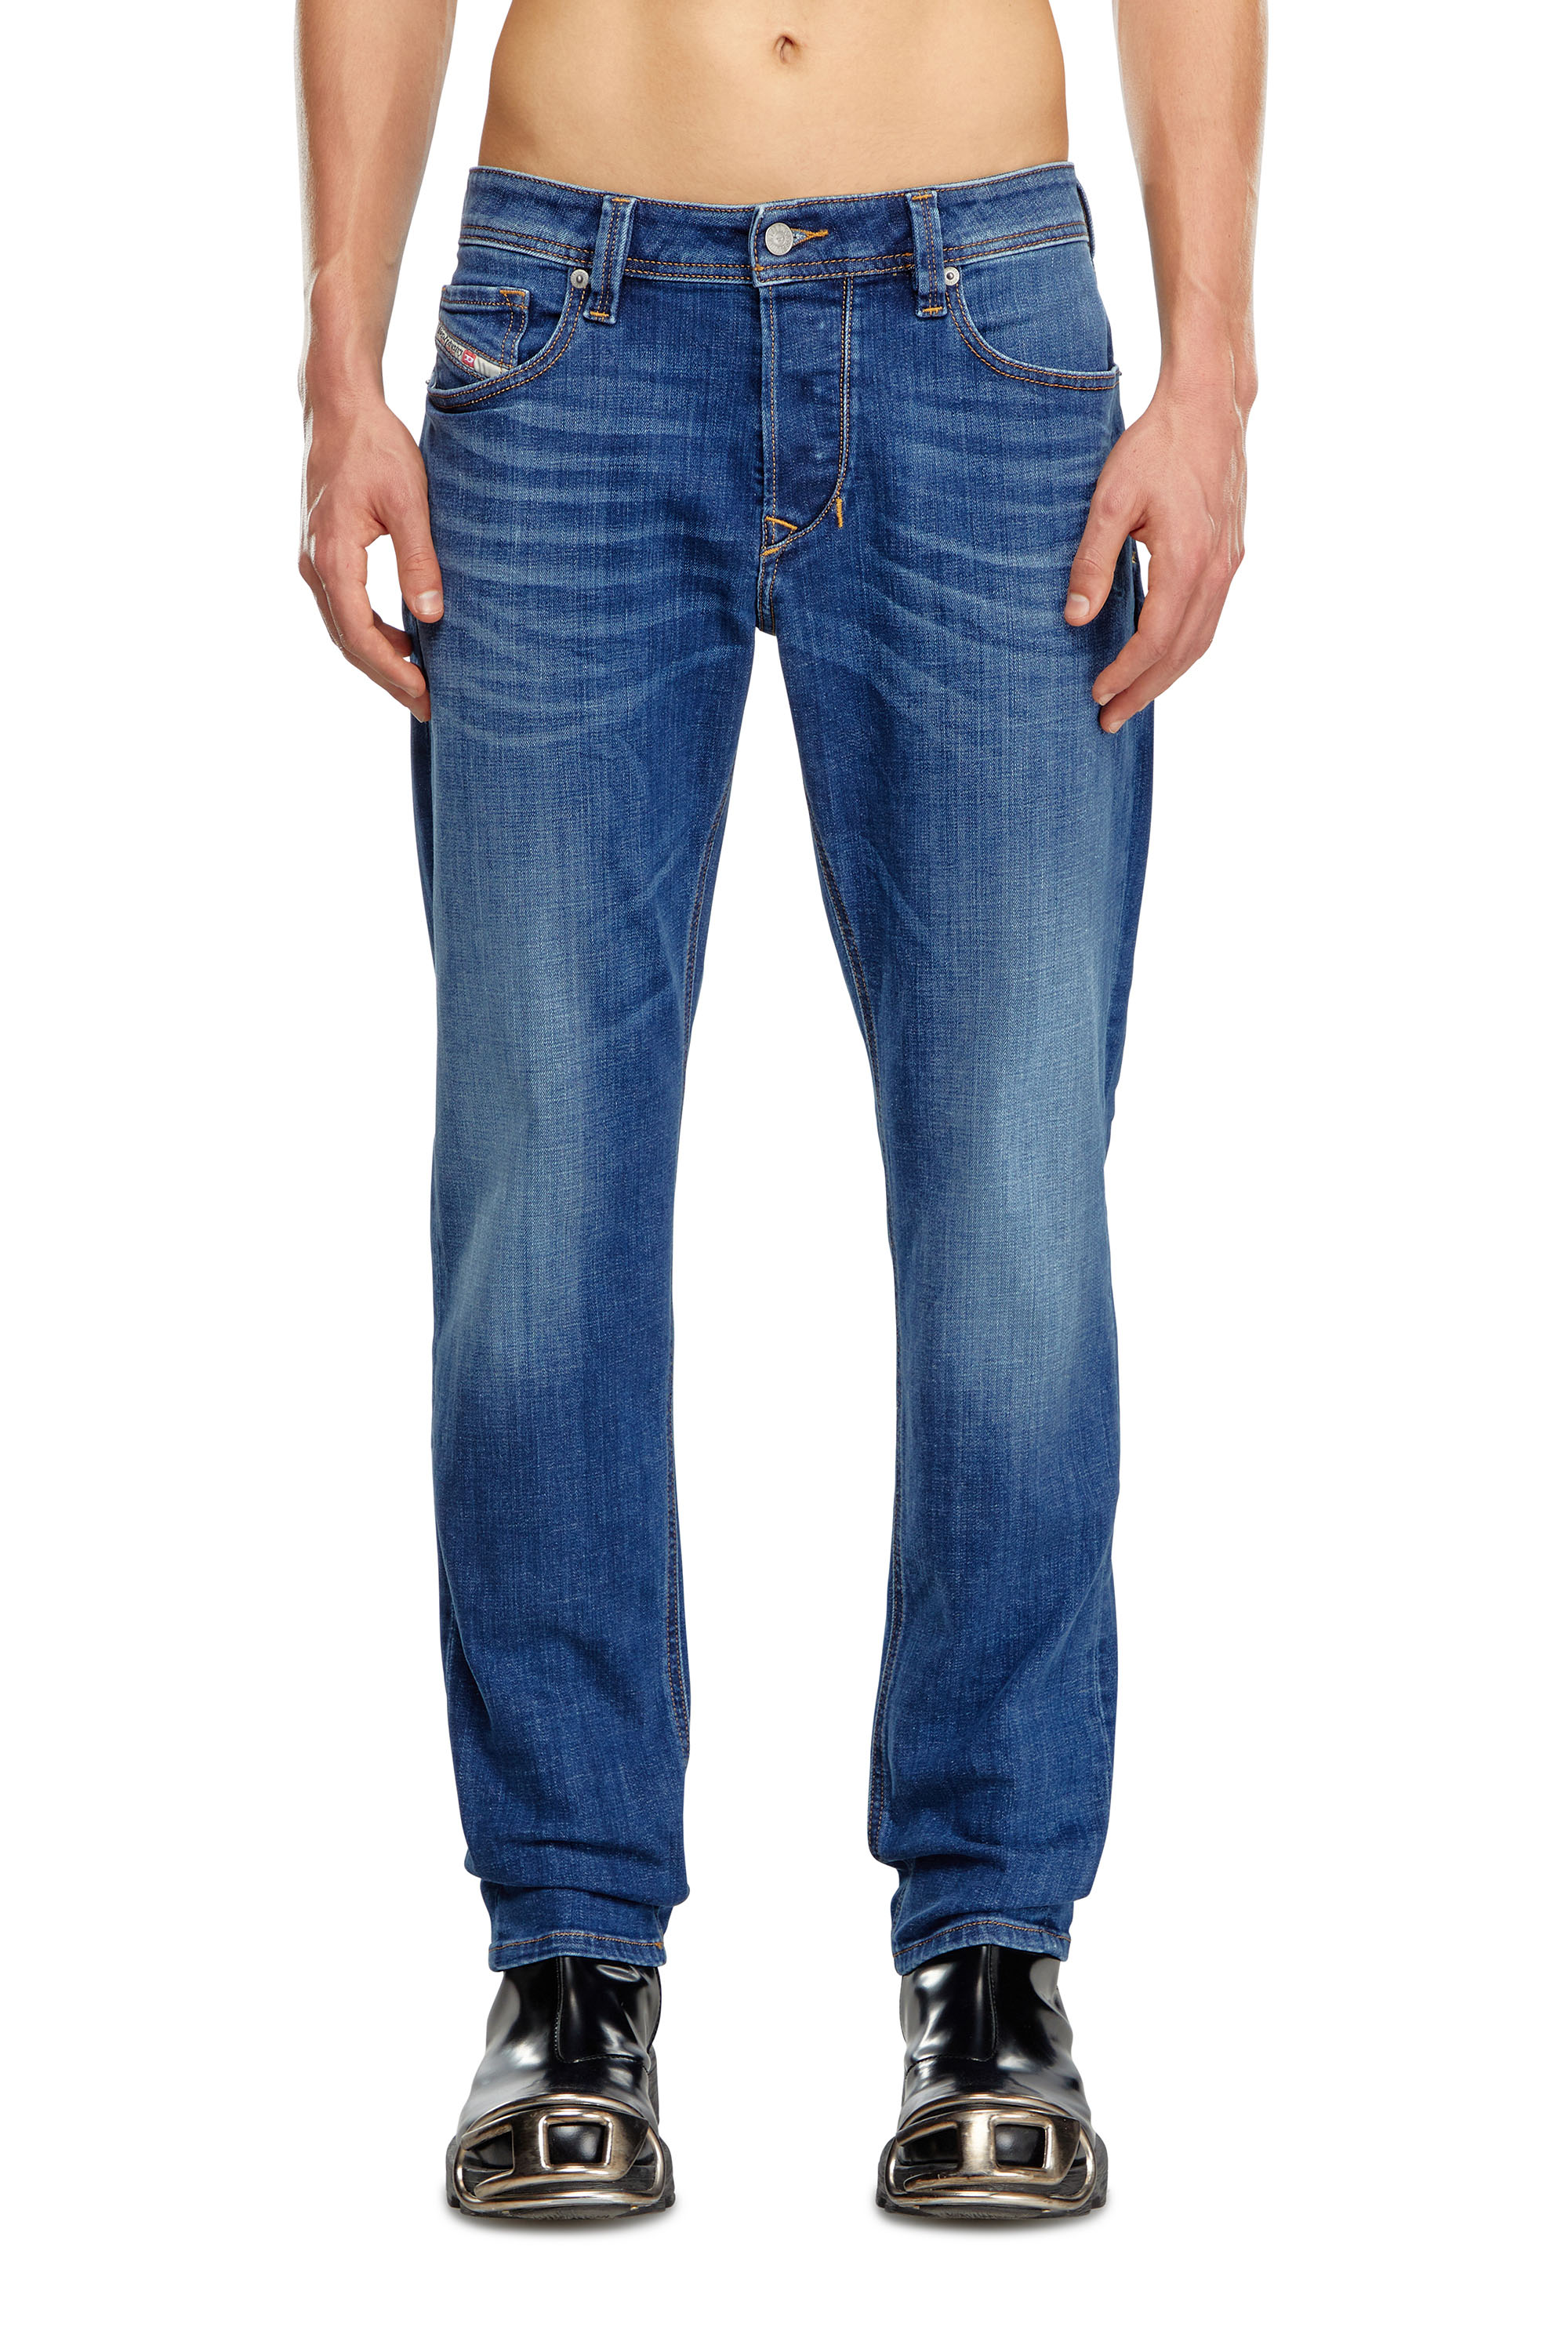 Diesel - Tapered Jeans 1986 Larkee-Beex 09K04, Hombre Tapered Jeans - 1986 Larkee-Beex in Azul marino - Image 2